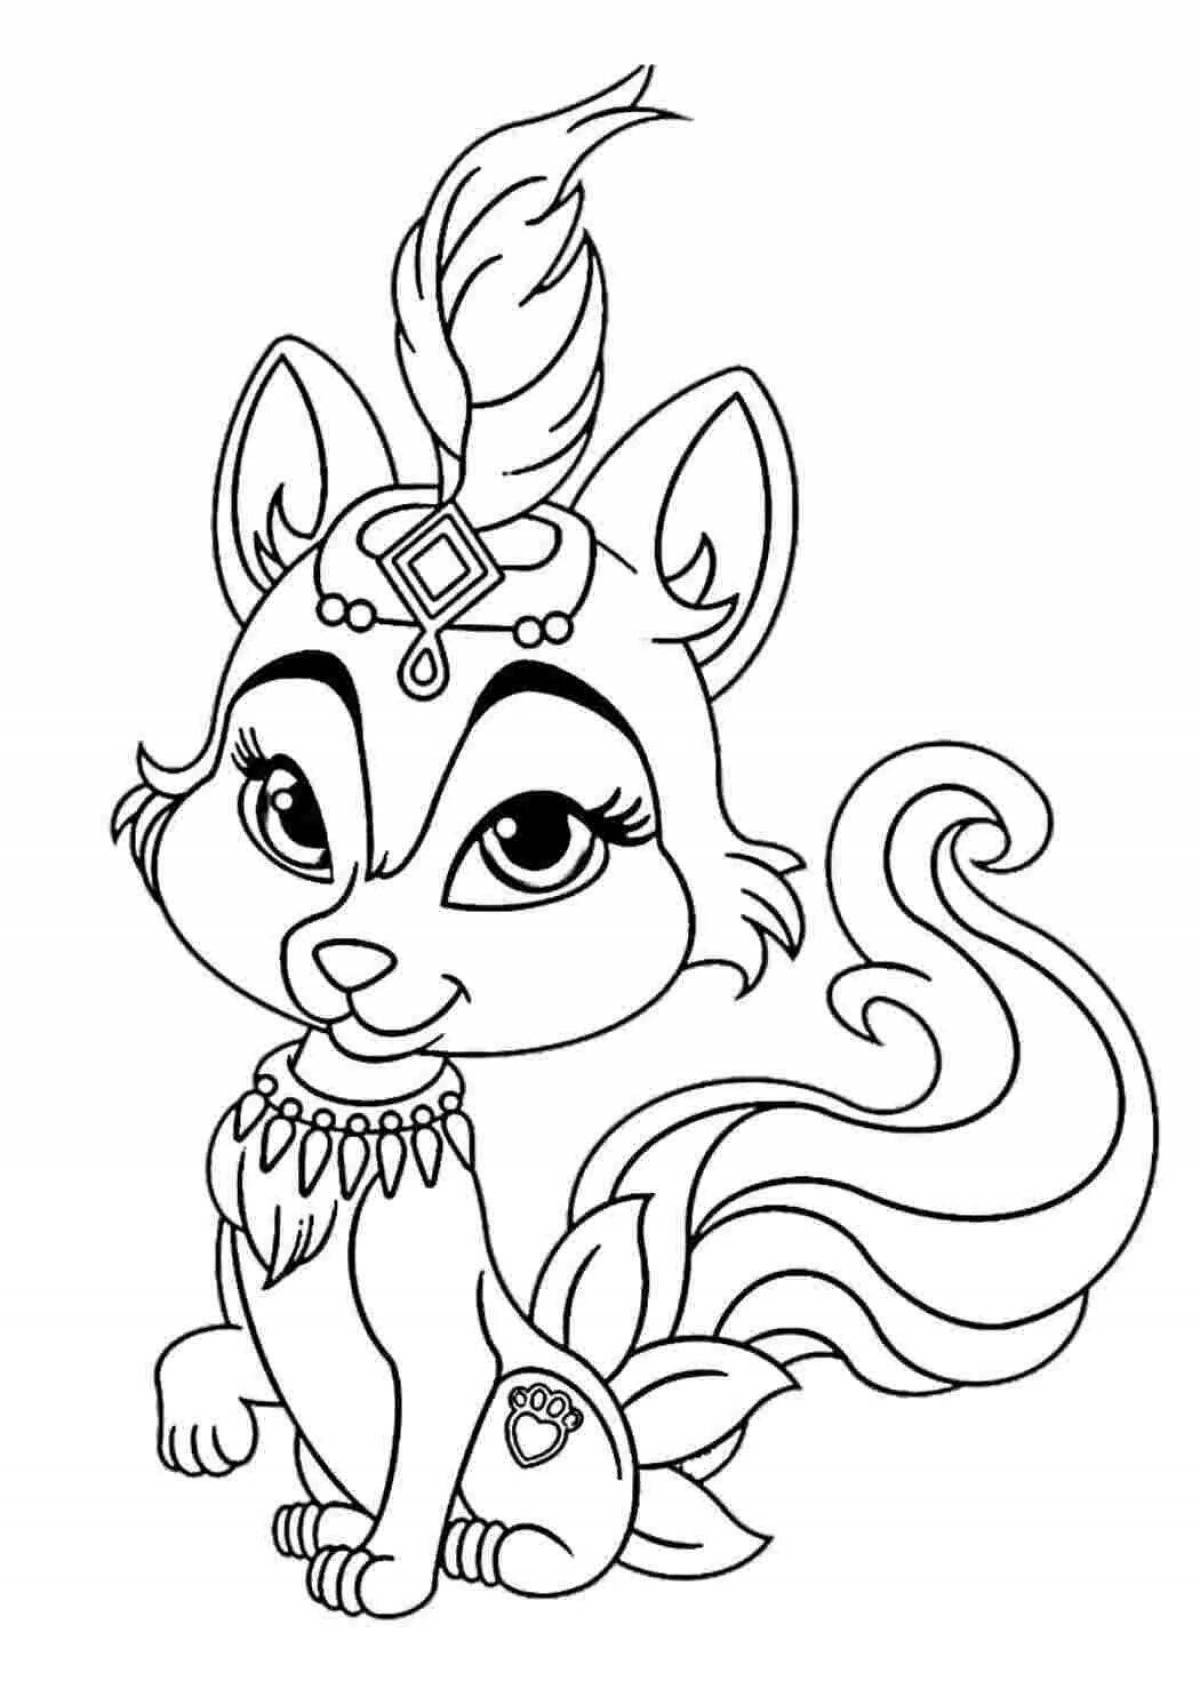 Awesome Disney princess pet coloring pages